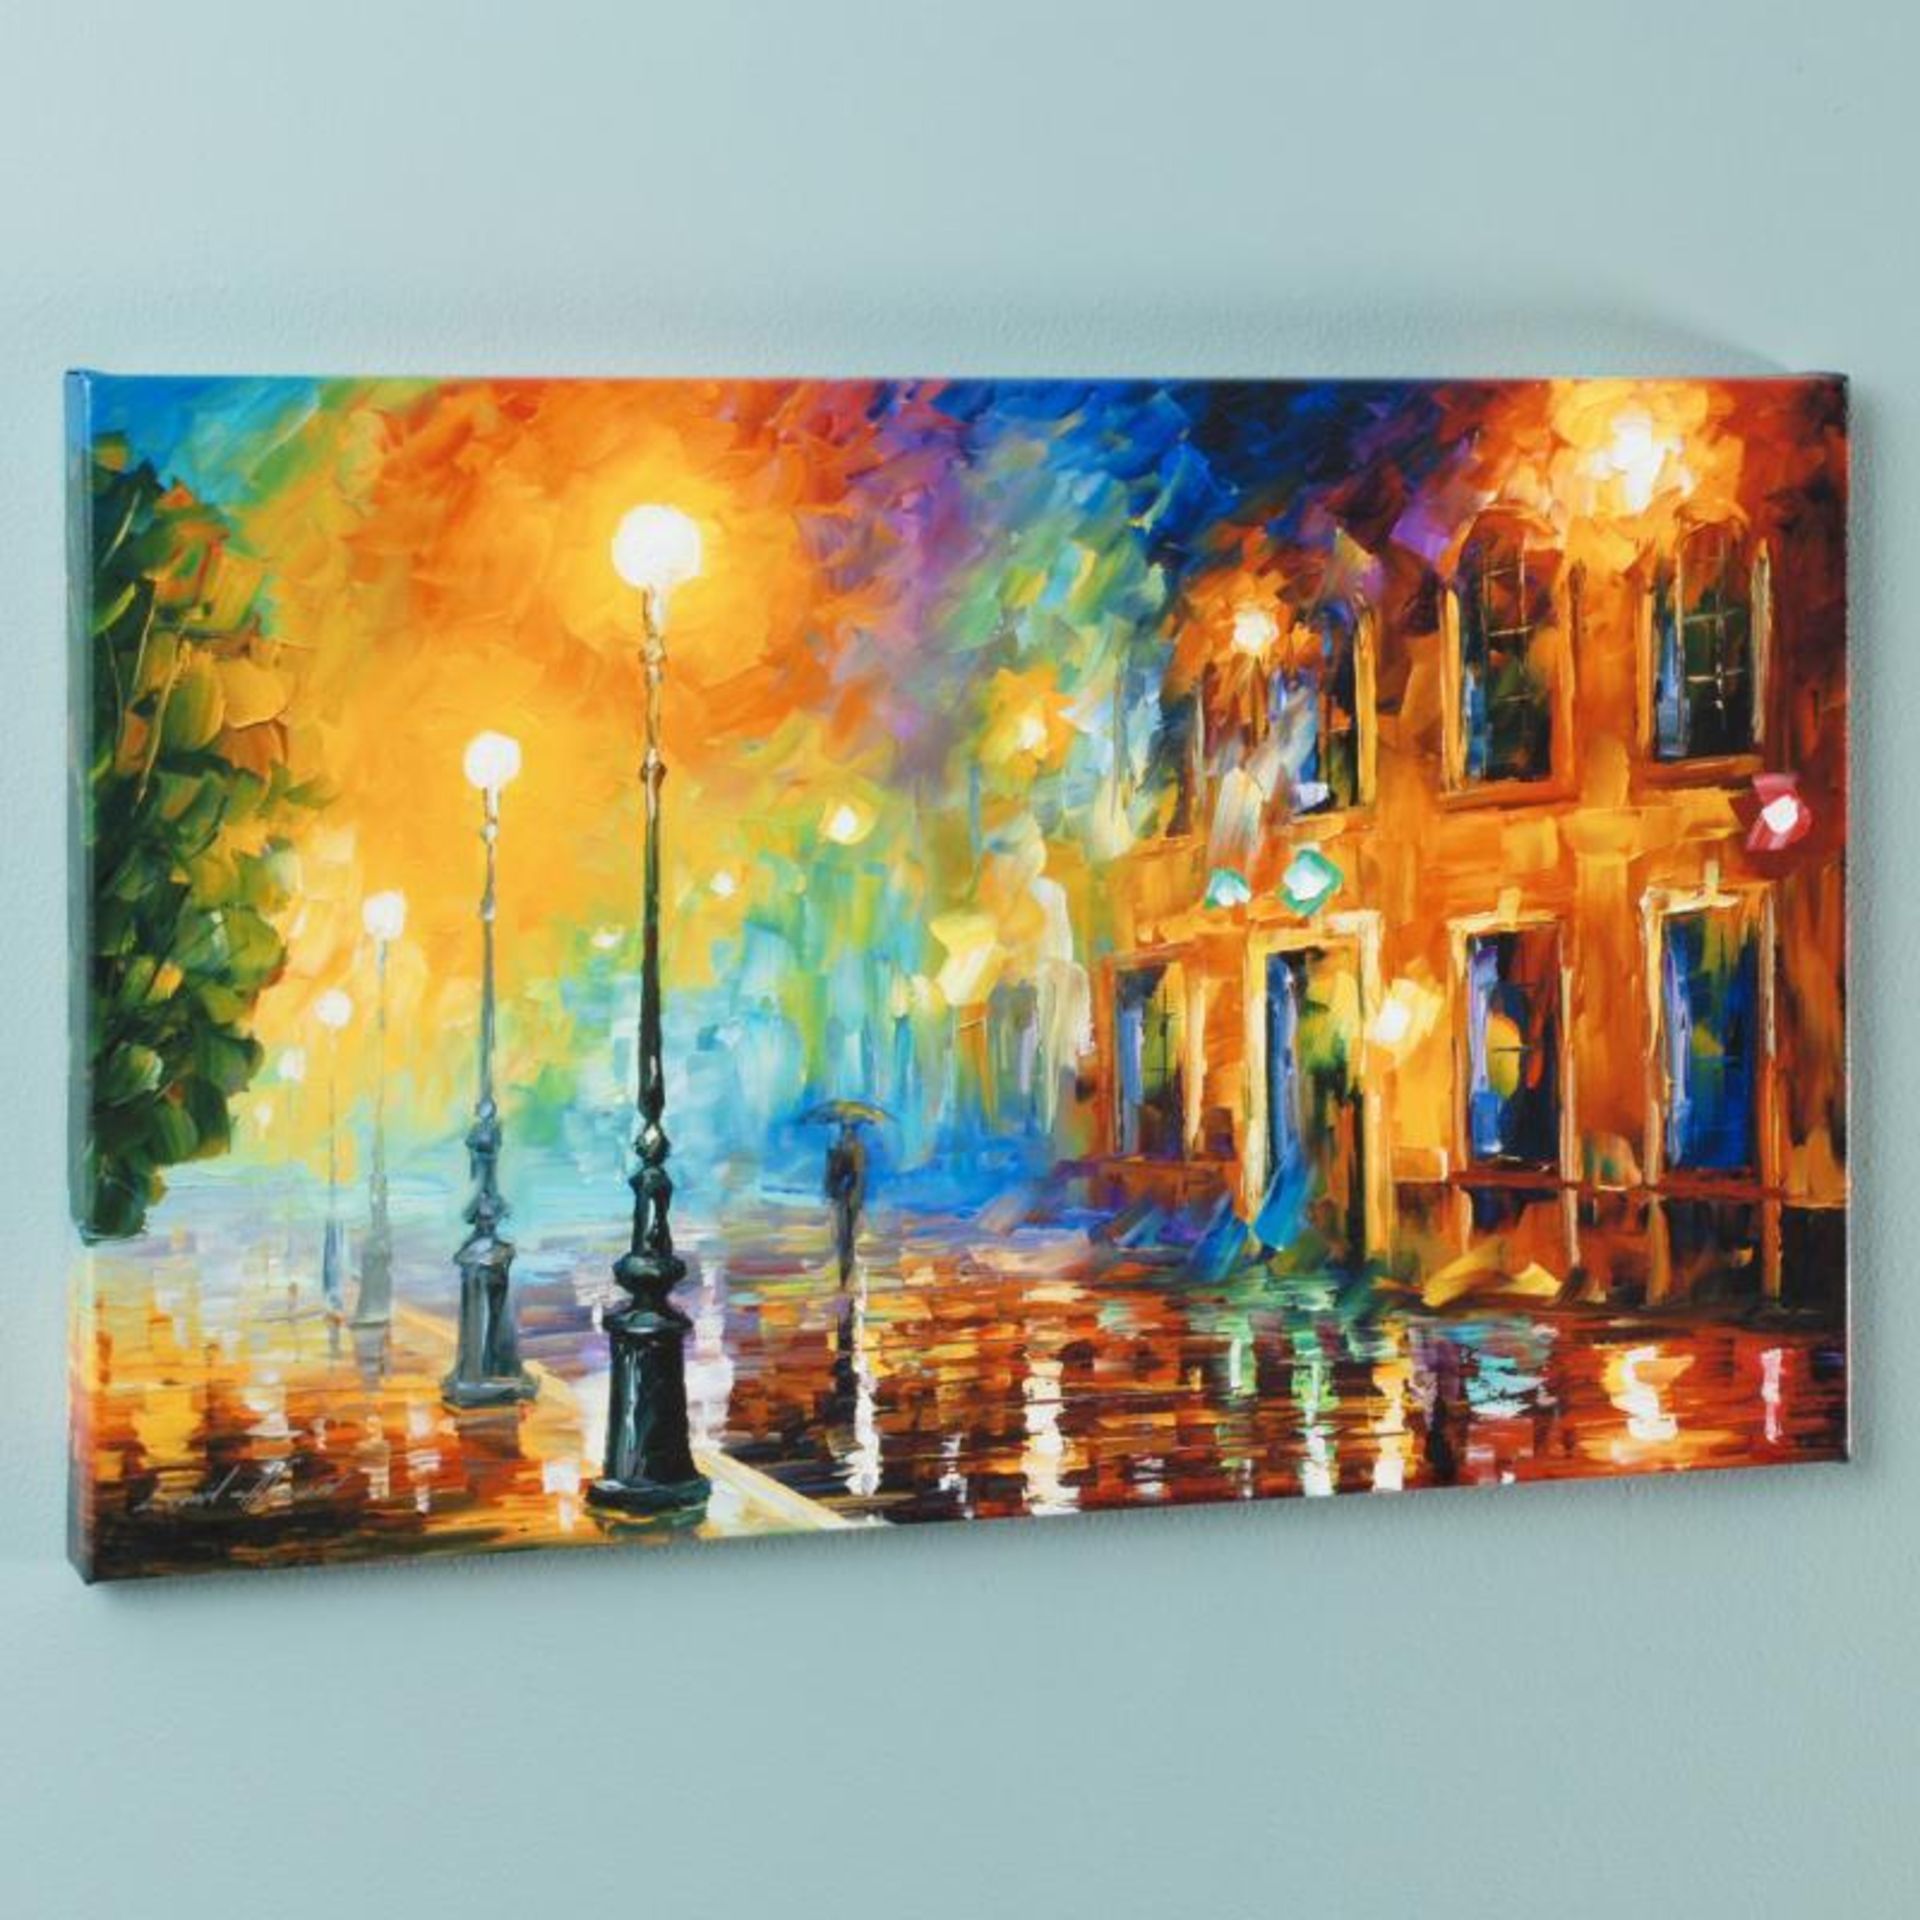 Leonid Afremov (1955-2019) "Misty City" Limited Edition Giclee on Canvas, Number - Image 3 of 3